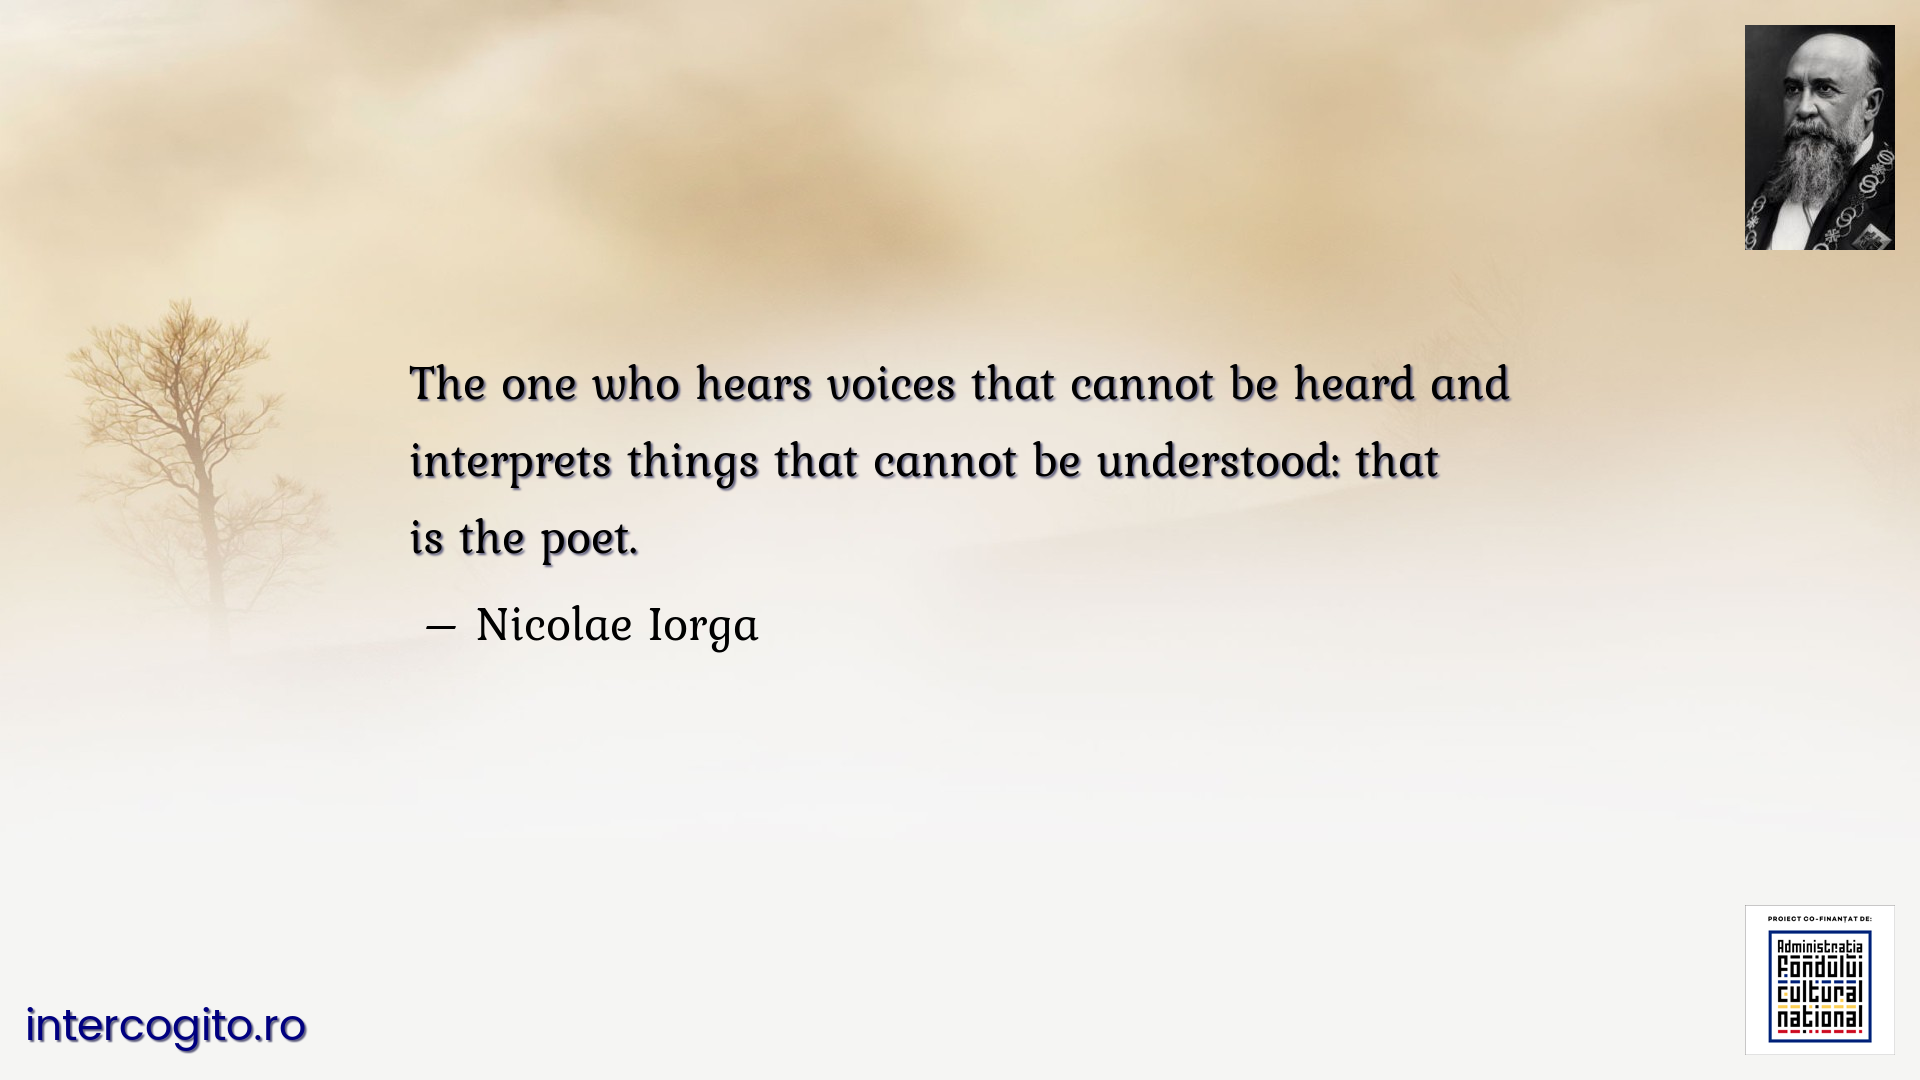 The one who hears voices that cannot be heard and interprets things that cannot be understood: that is the poet.